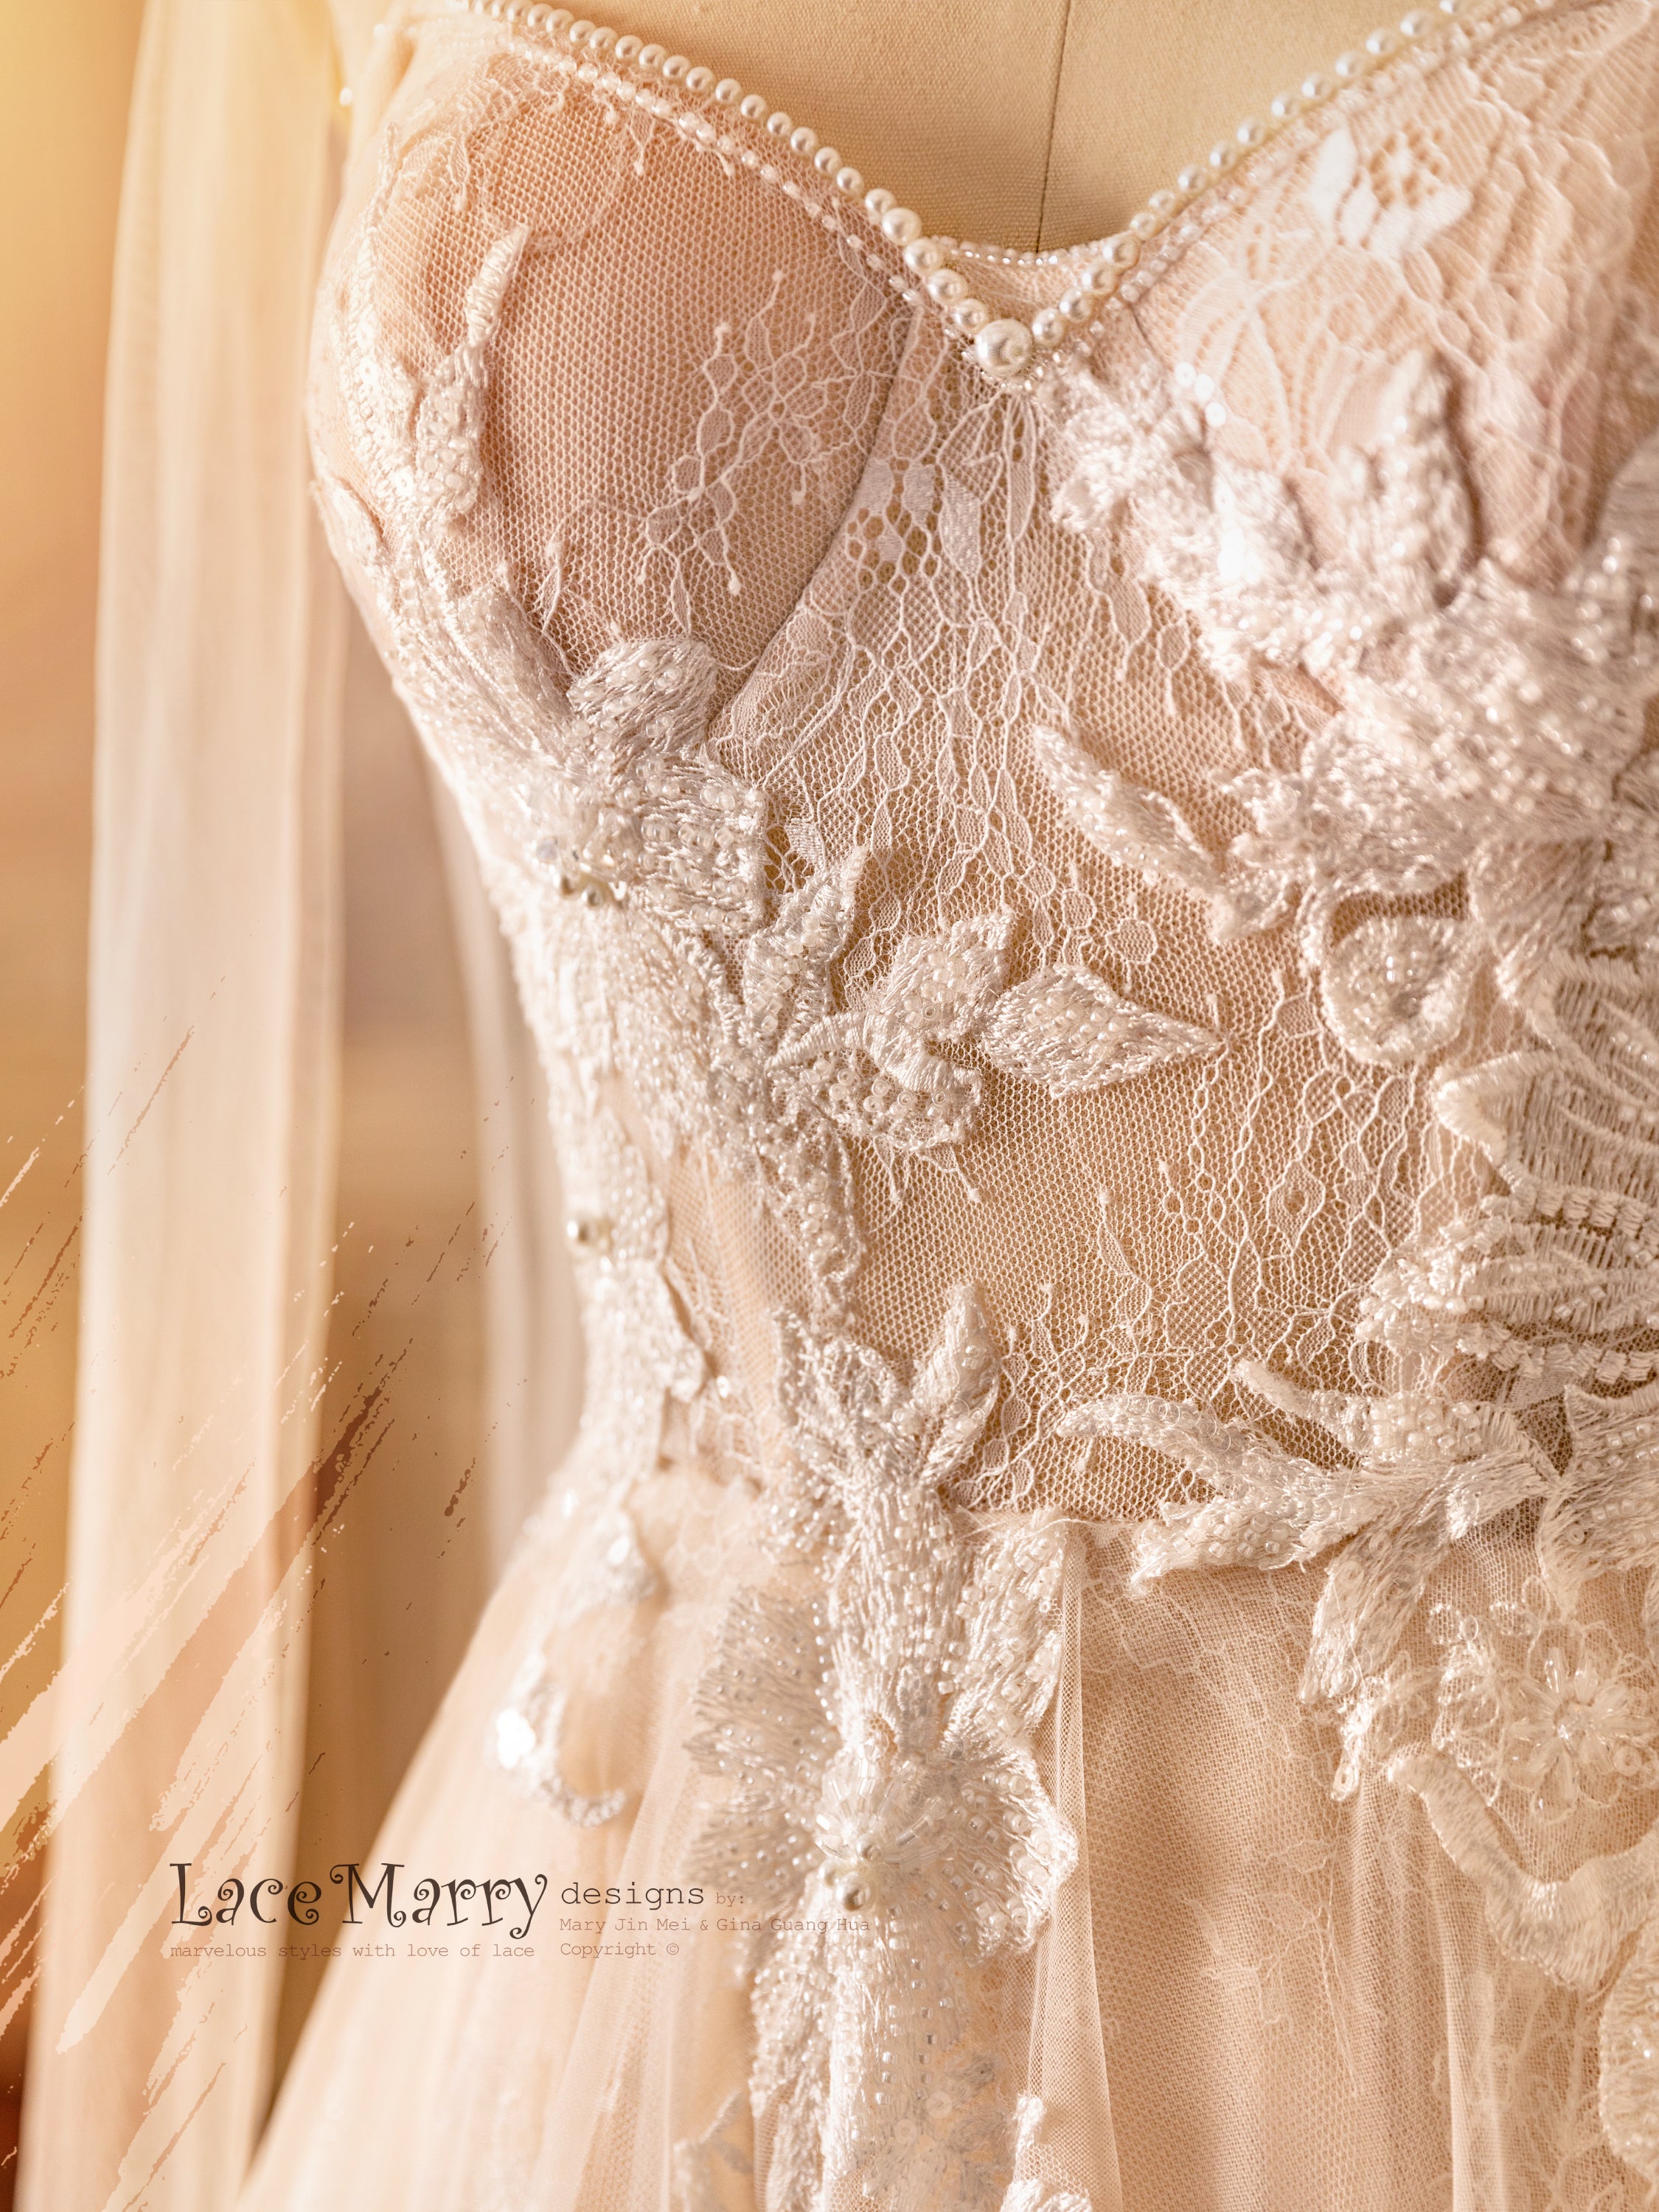 NICOLETTE / Amazing Lace Wedding Dress with Small Cape Sleeves - LaceMarry